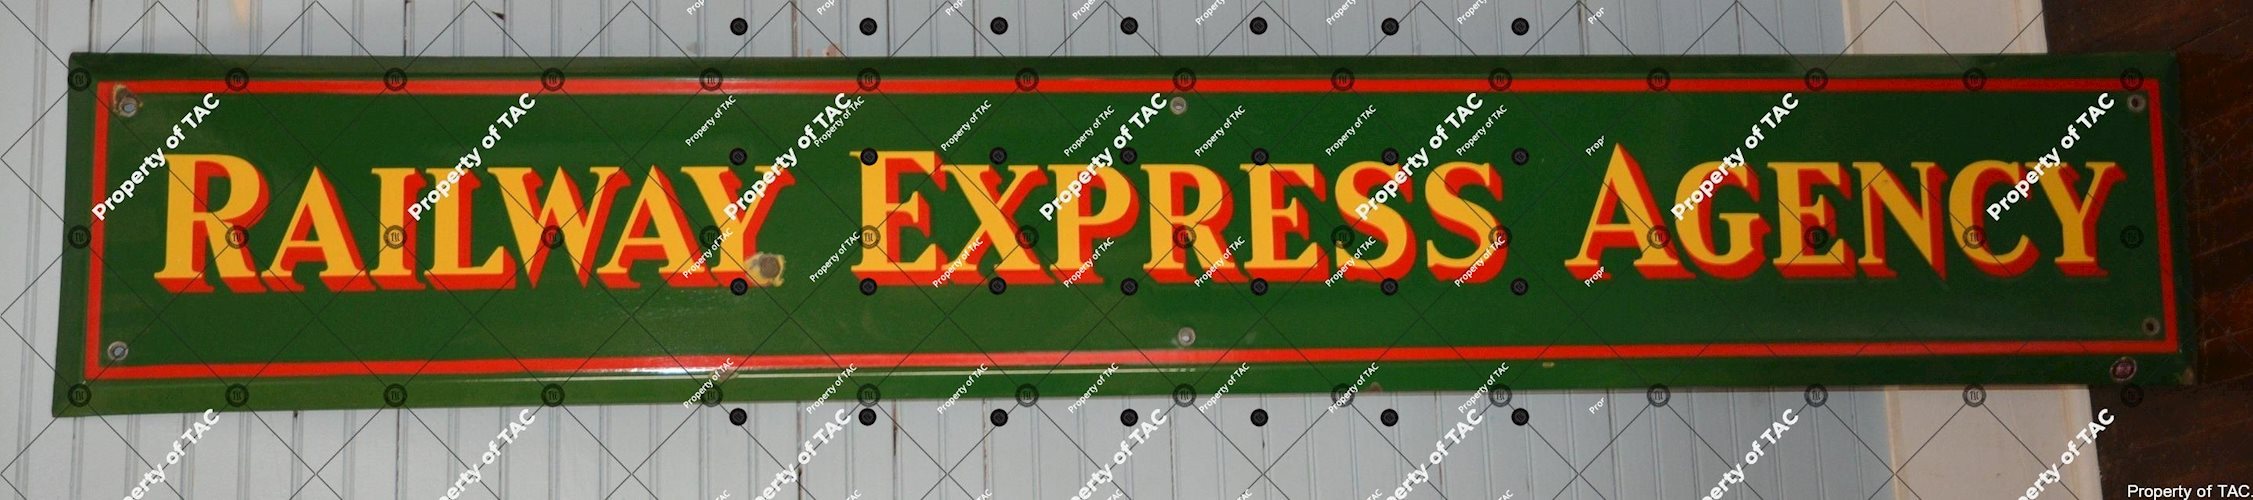 Railway Express Agency sign